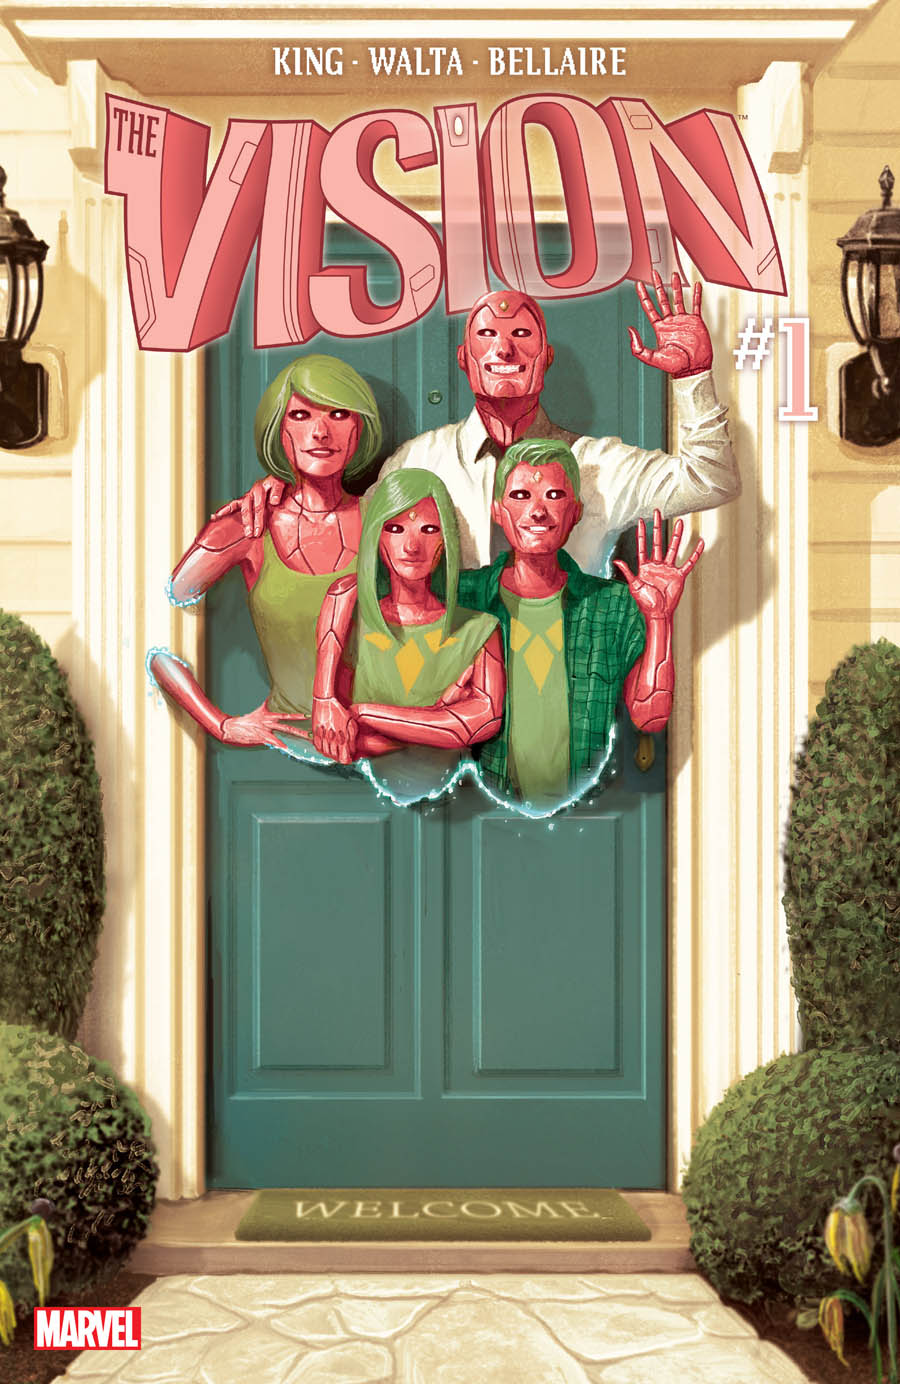 The vision, best comic read all week